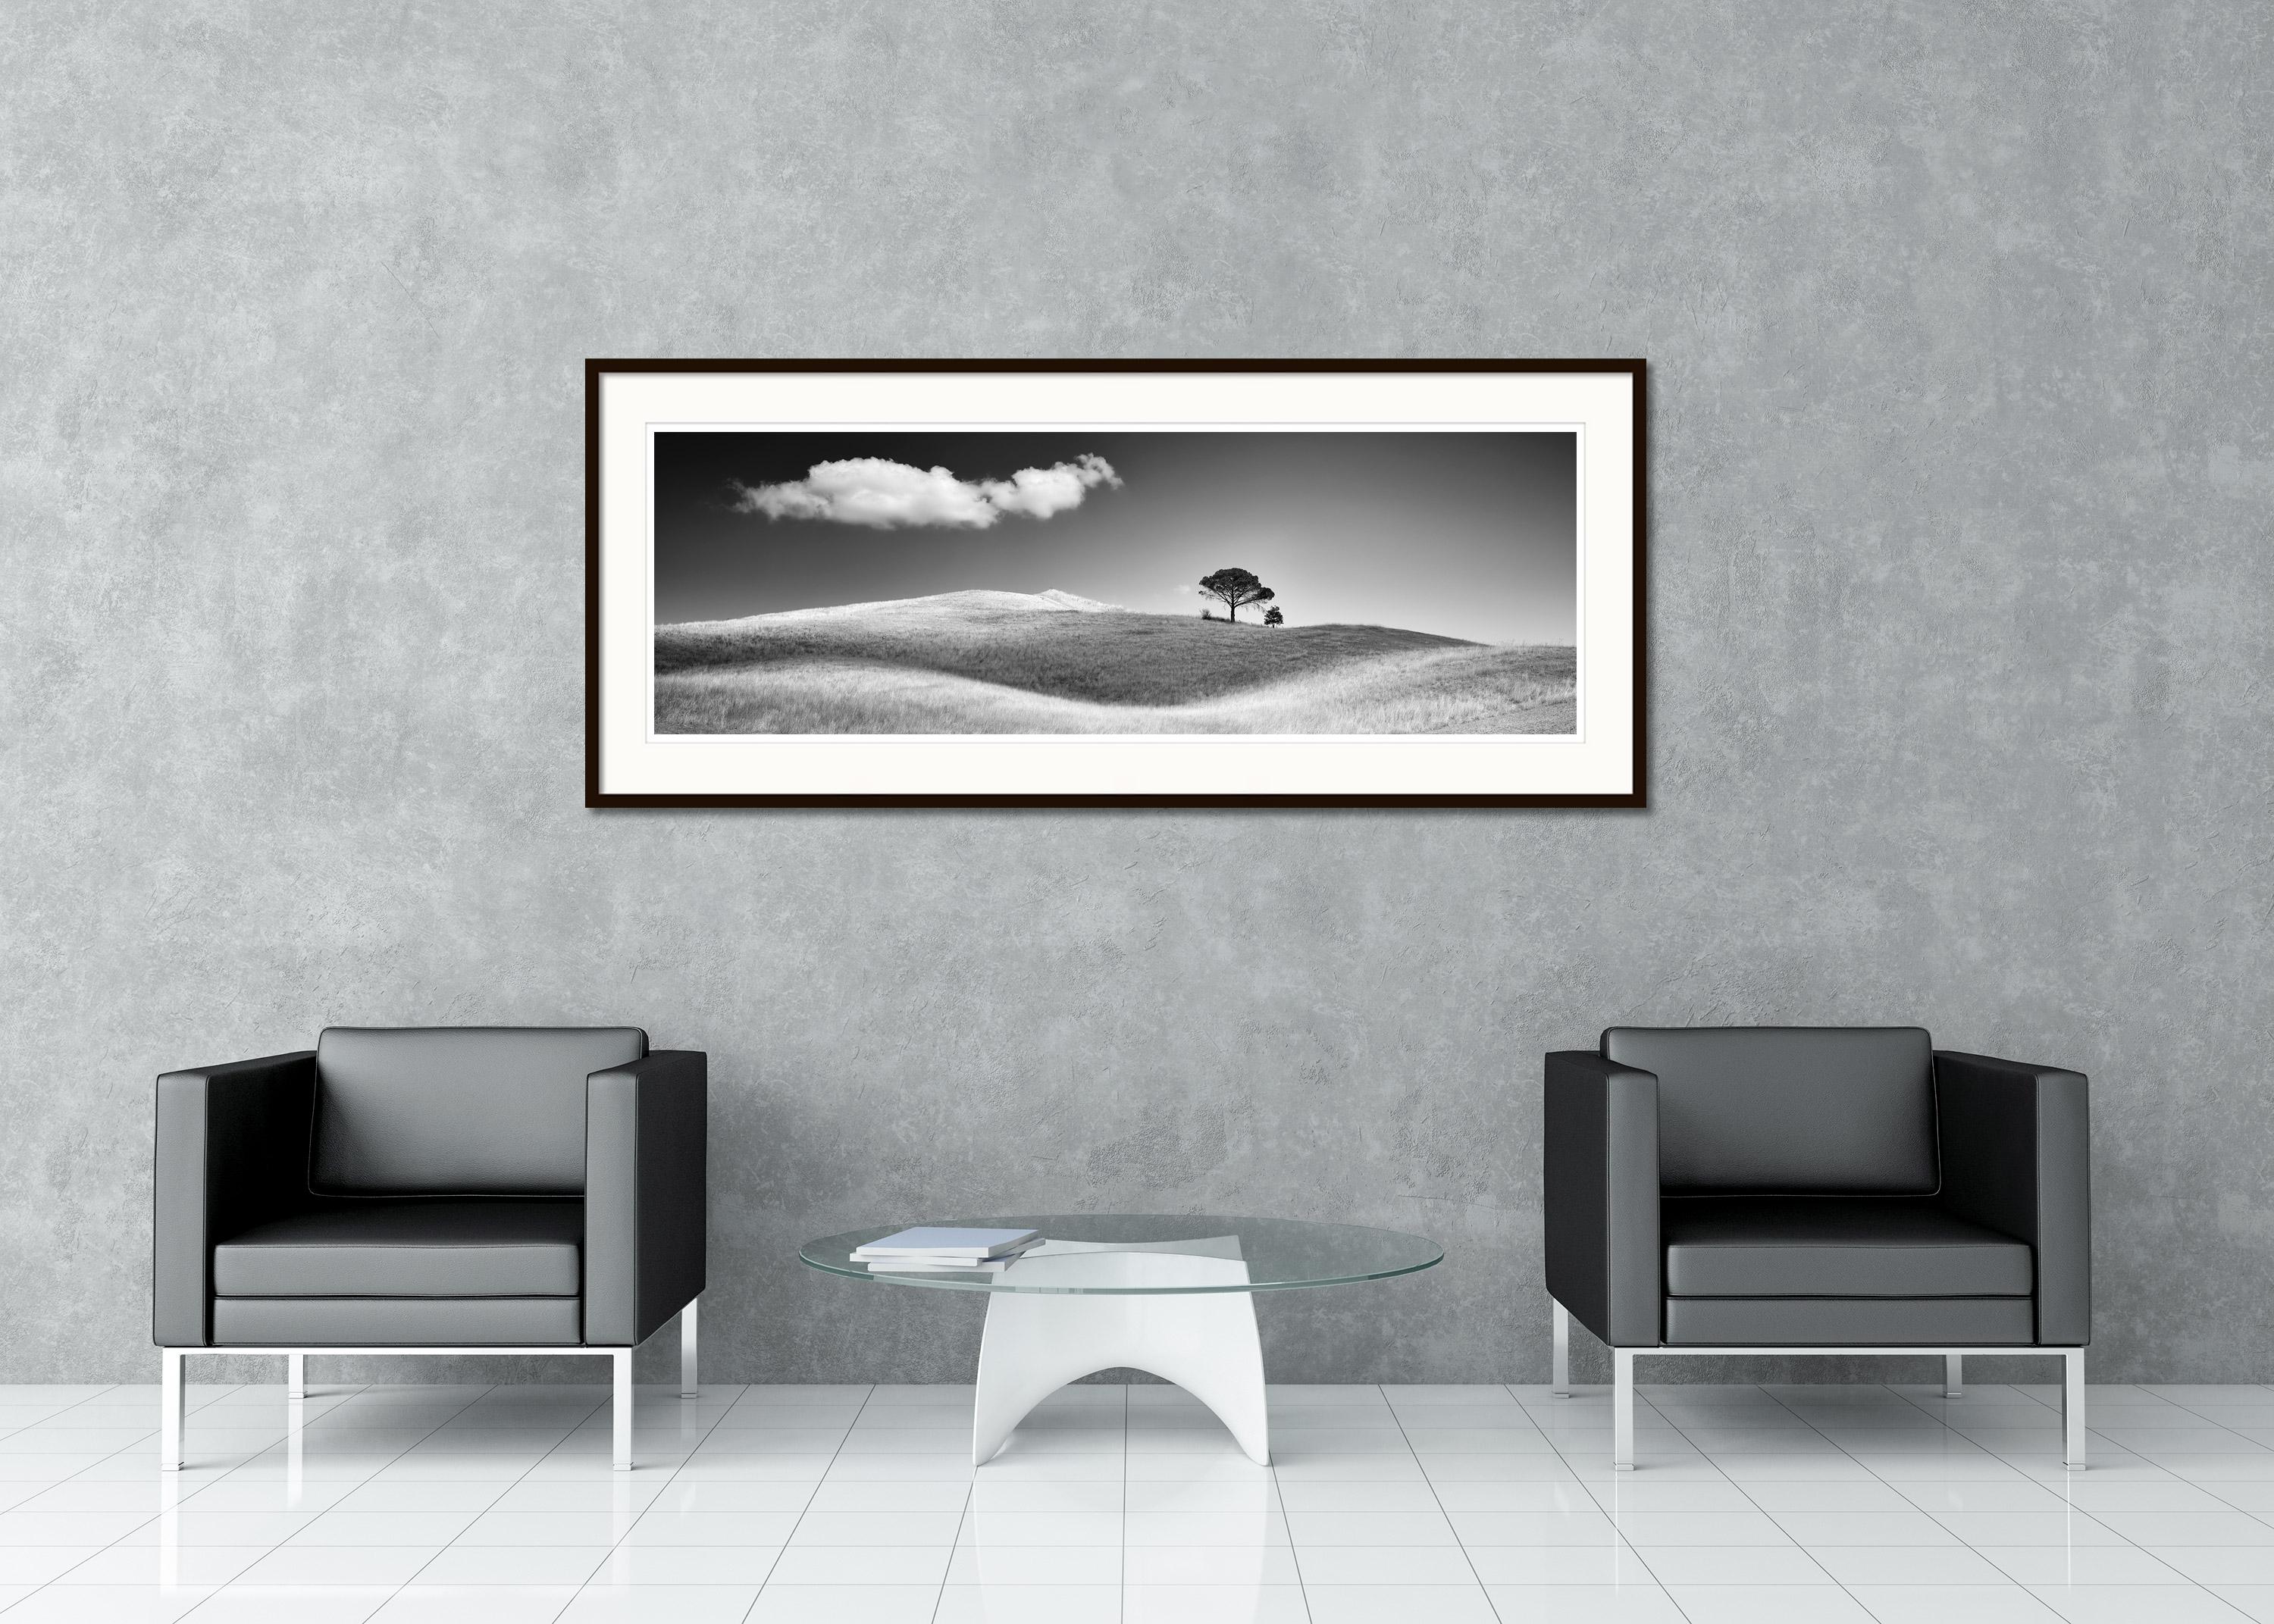 Black and white fine art landscape photography. Archival pigment ink print as part of a limited edition of 7. All Gerald Berghammer prints are made to order in limited editions on Hahnemuehle Photo Rag Baryta. Each print is stamped on the back and